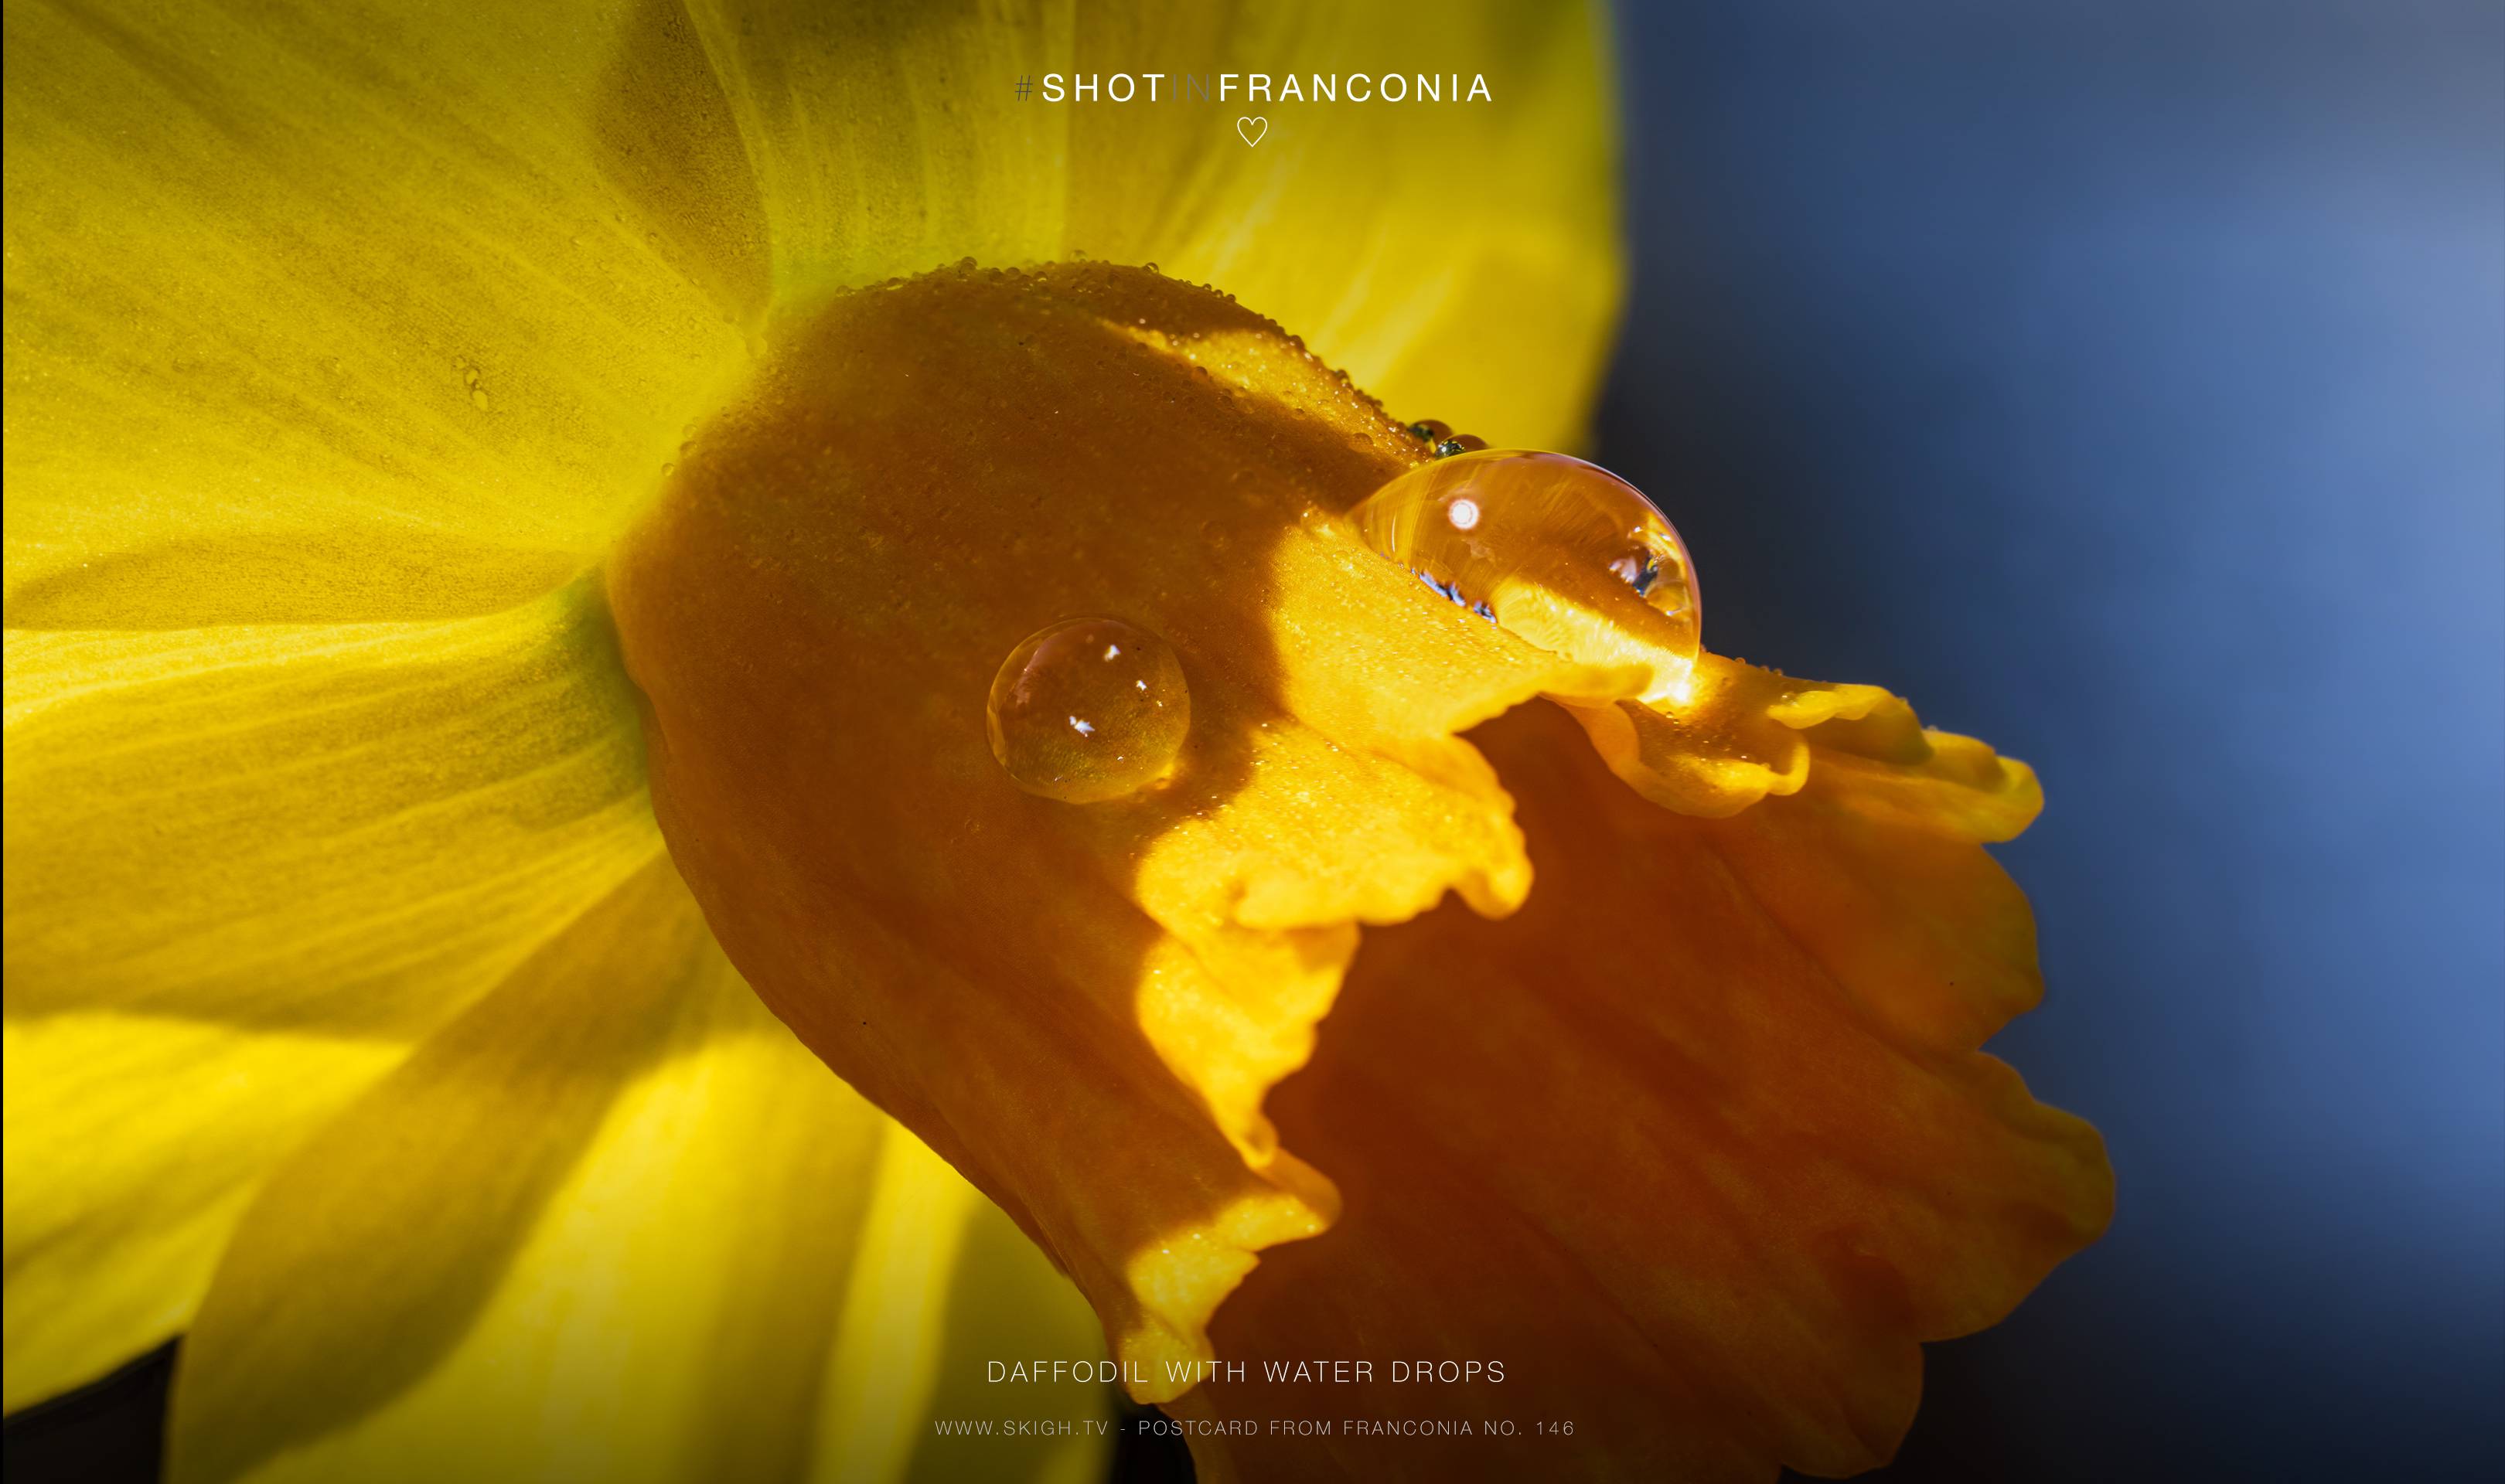 Daffodil with water drops